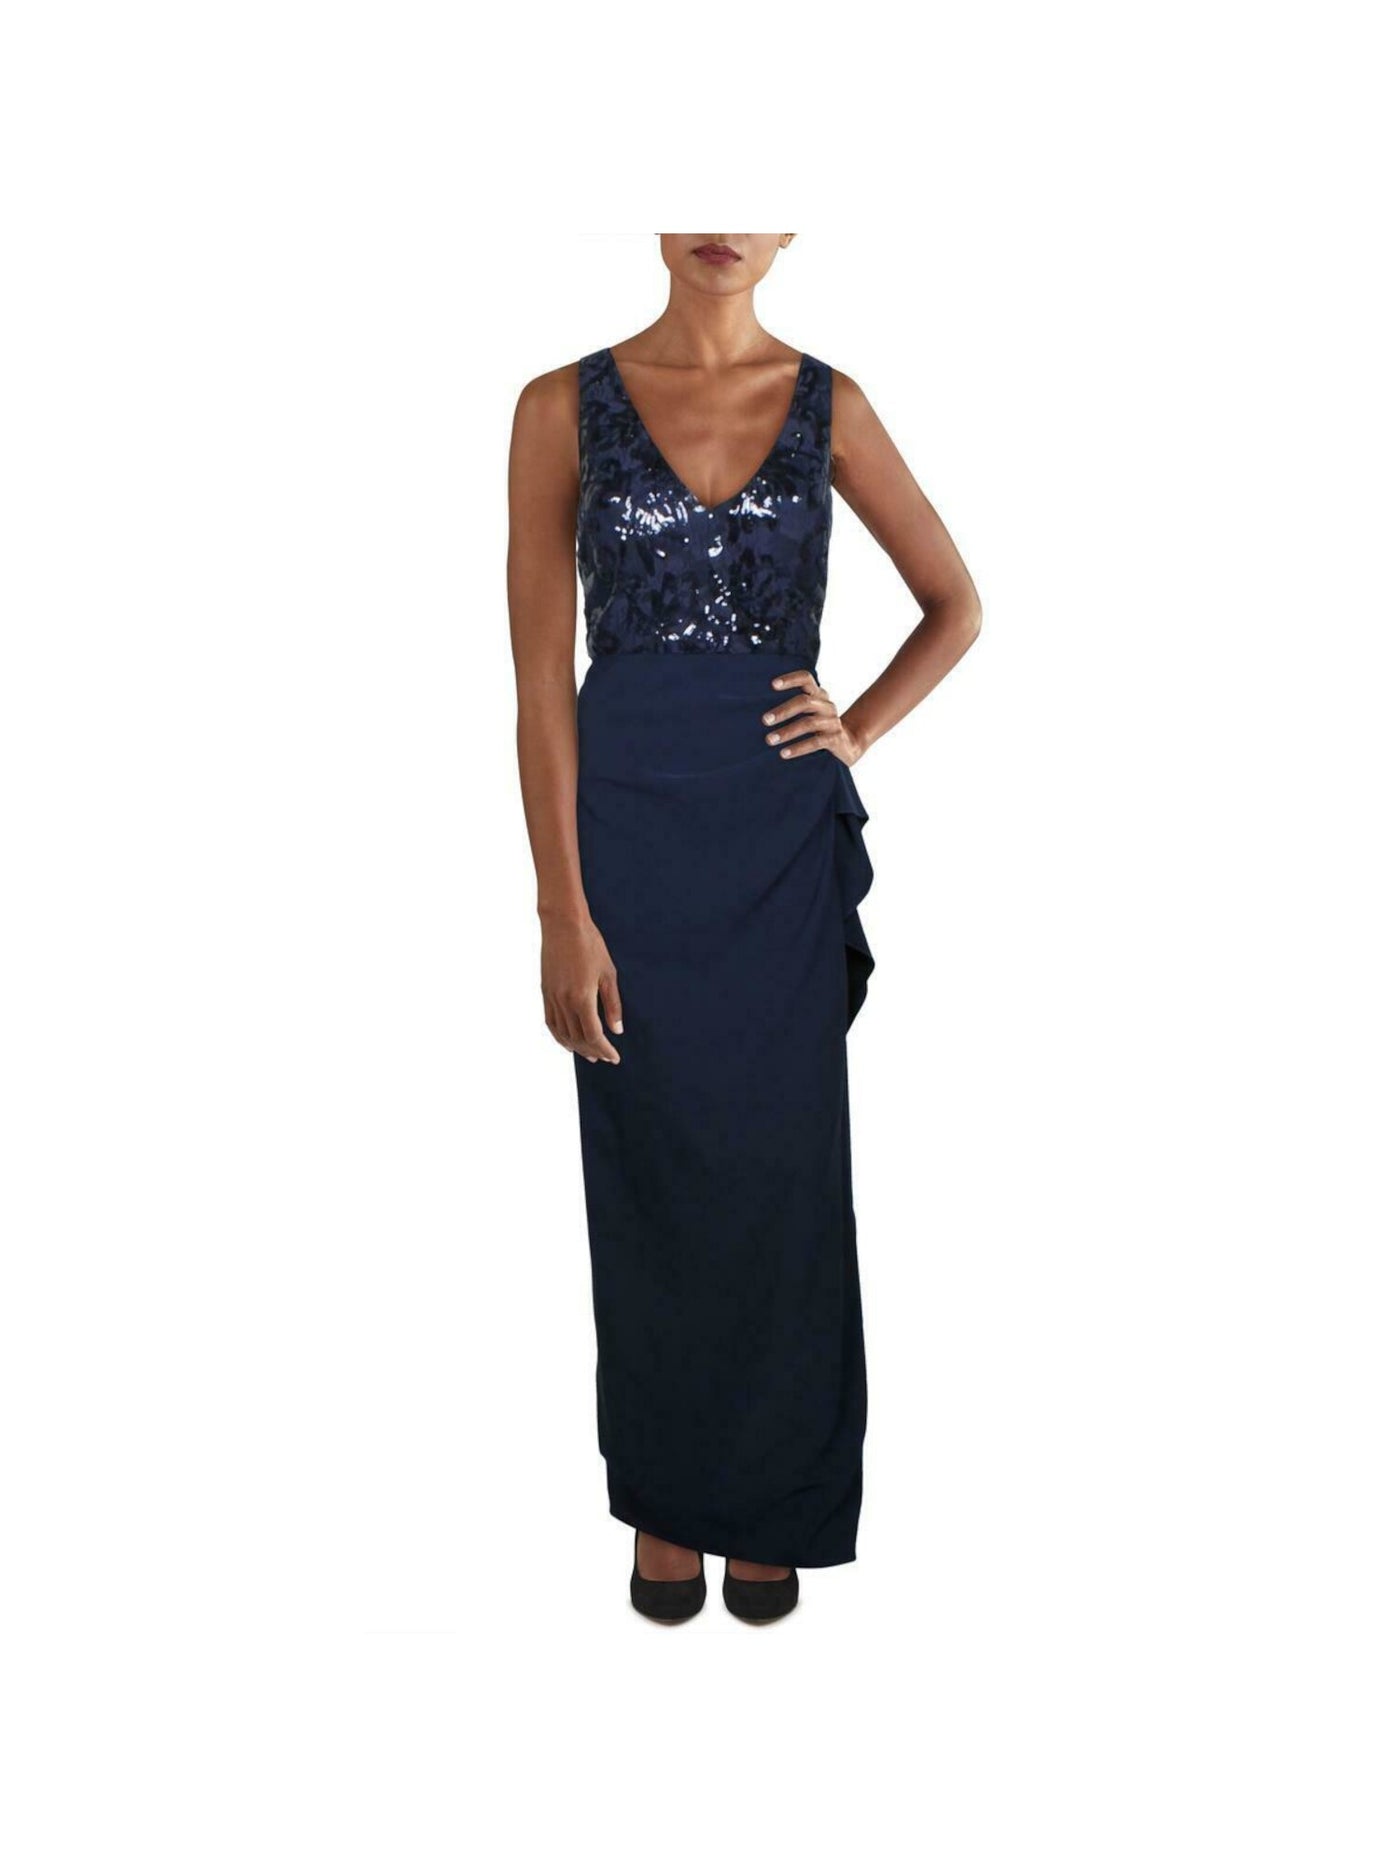 VINCE CAMUTO Womens Navy Stretch Sequined Embroidered Zippered Cascade Ruffle Floral Sleeveless V Neck Full-Length Formal Gown Dress 8